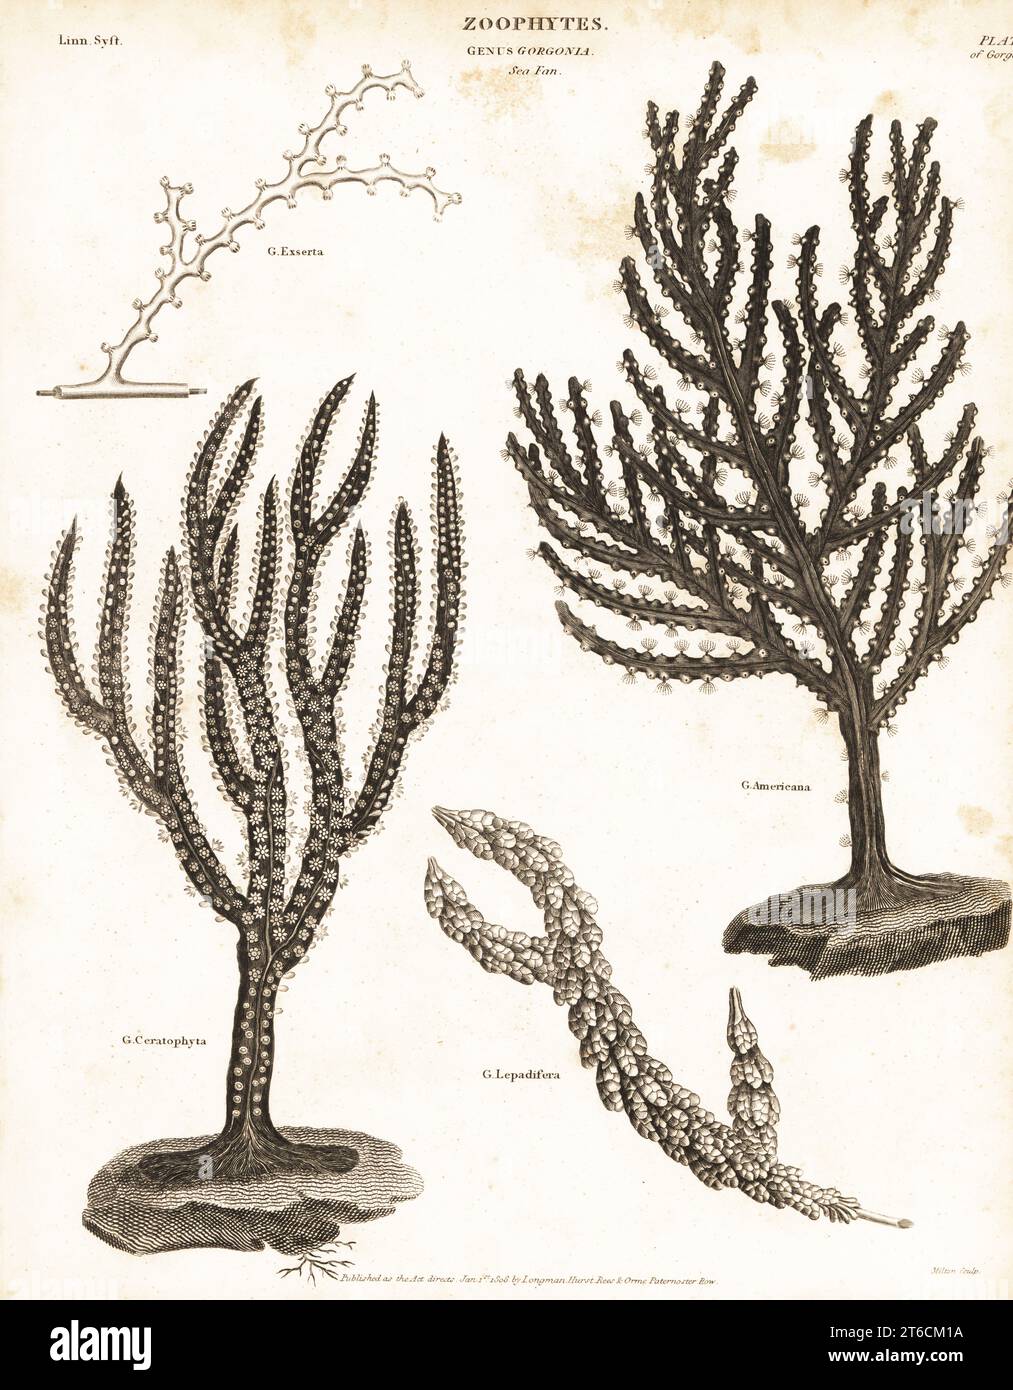 Soft coral sea fan, Antillogorgia americana, sea whip, Ellisella ceratophyta, red tree coral, Primnoa resedaeformis, and octocoral, Swiftia exserta. Copperplate engraving by Milton from Abraham Rees' Cyclopedia or Universal Dictionary of Arts, Sciences and Literature, Longman, Hurst, Rees and Orme, London, 1808. Stock Photo